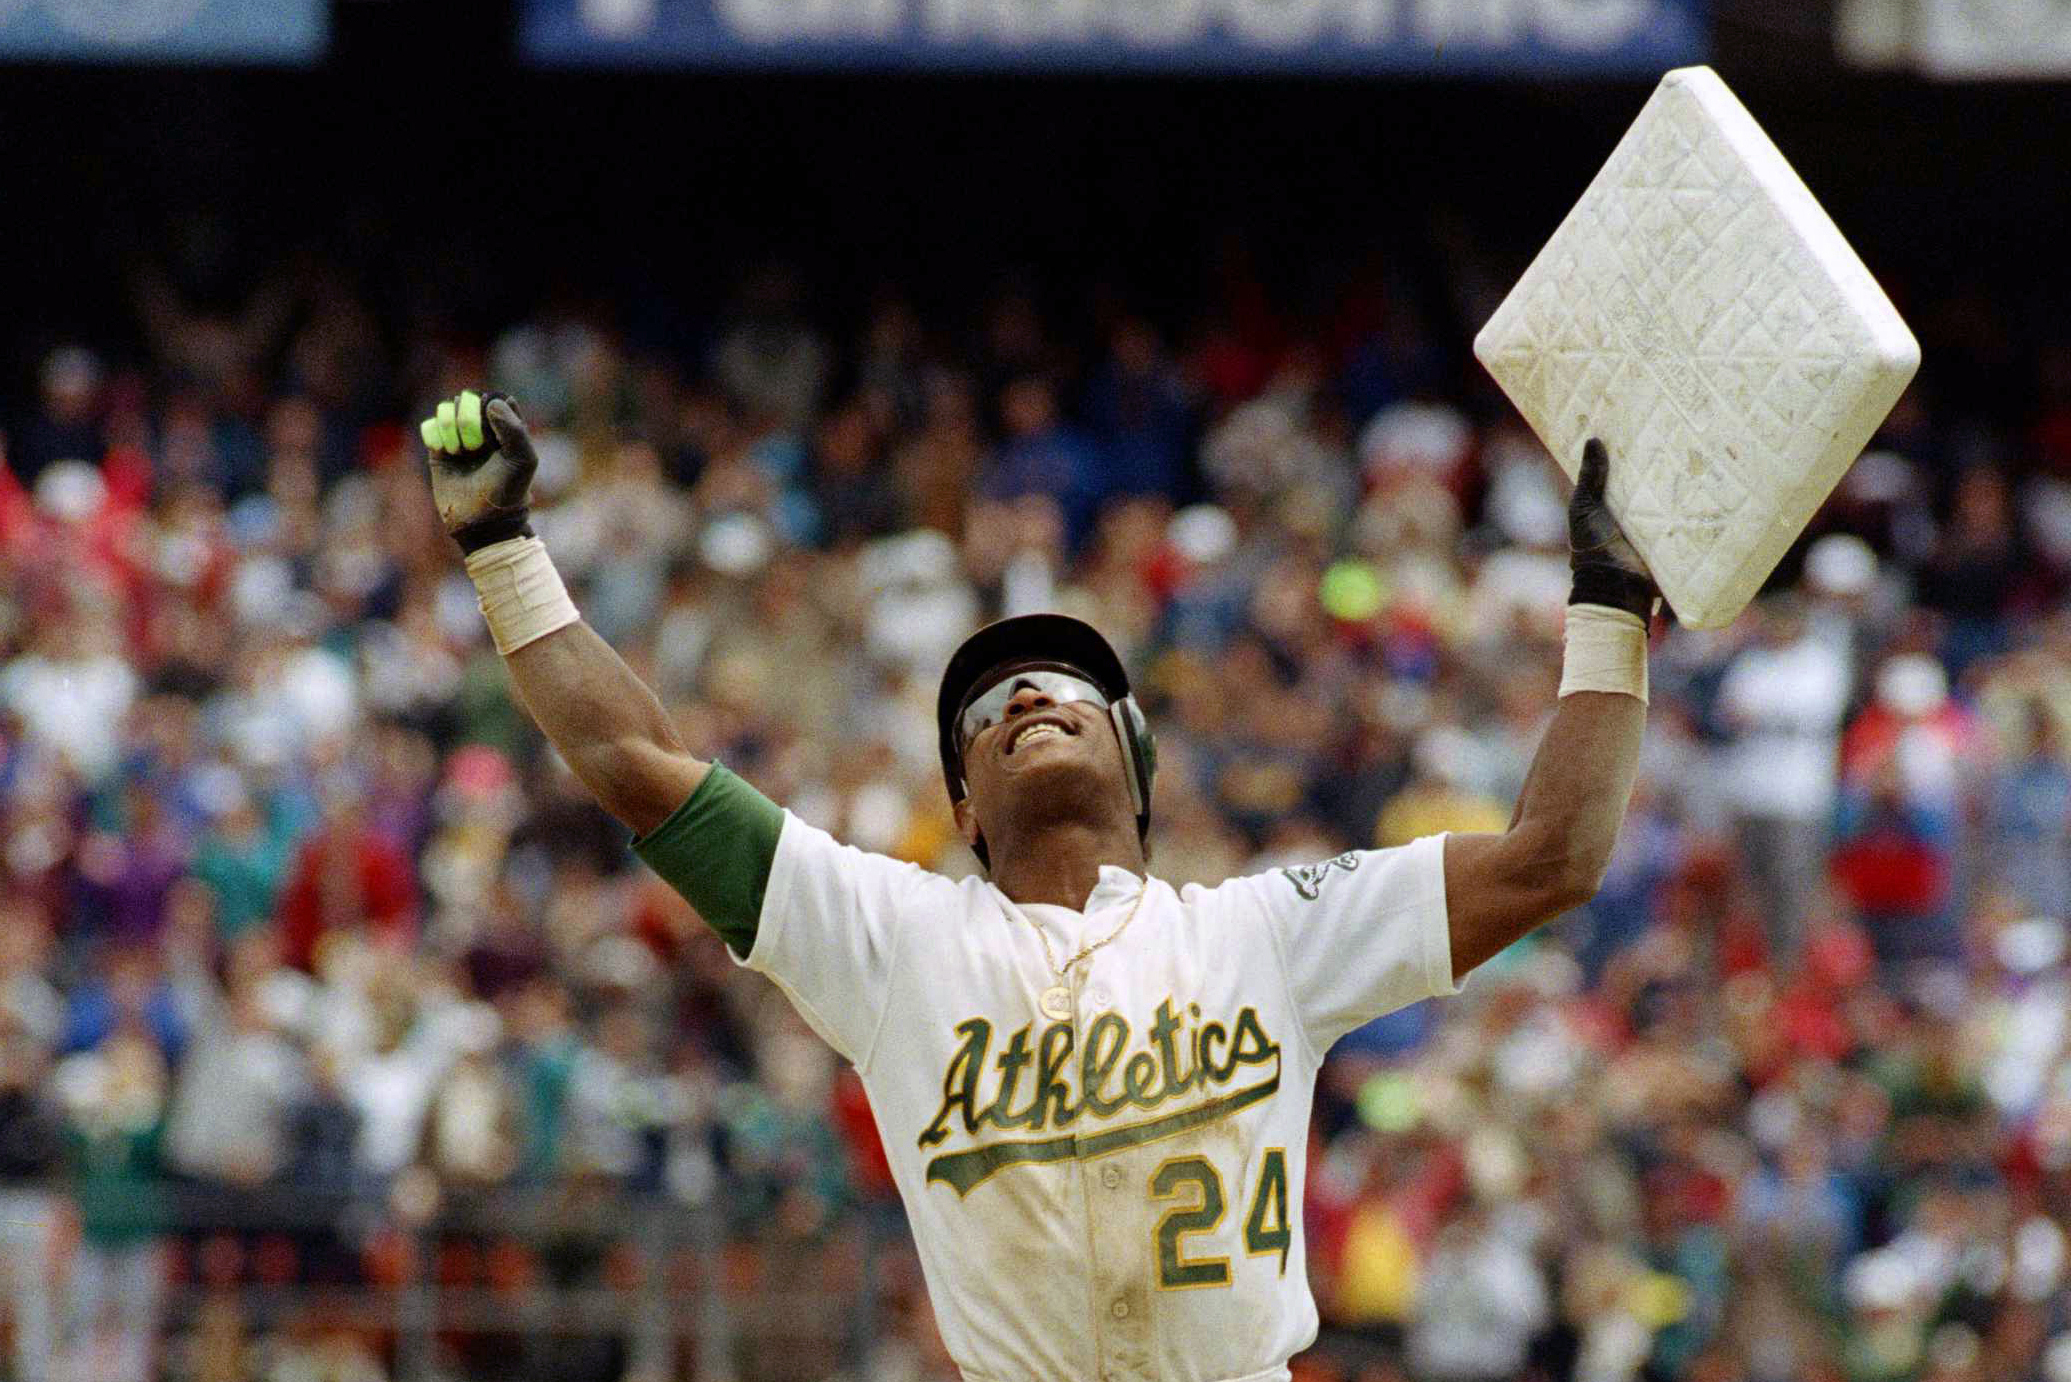 This is what Rickey Henderson's 1406 career stolen bases looks